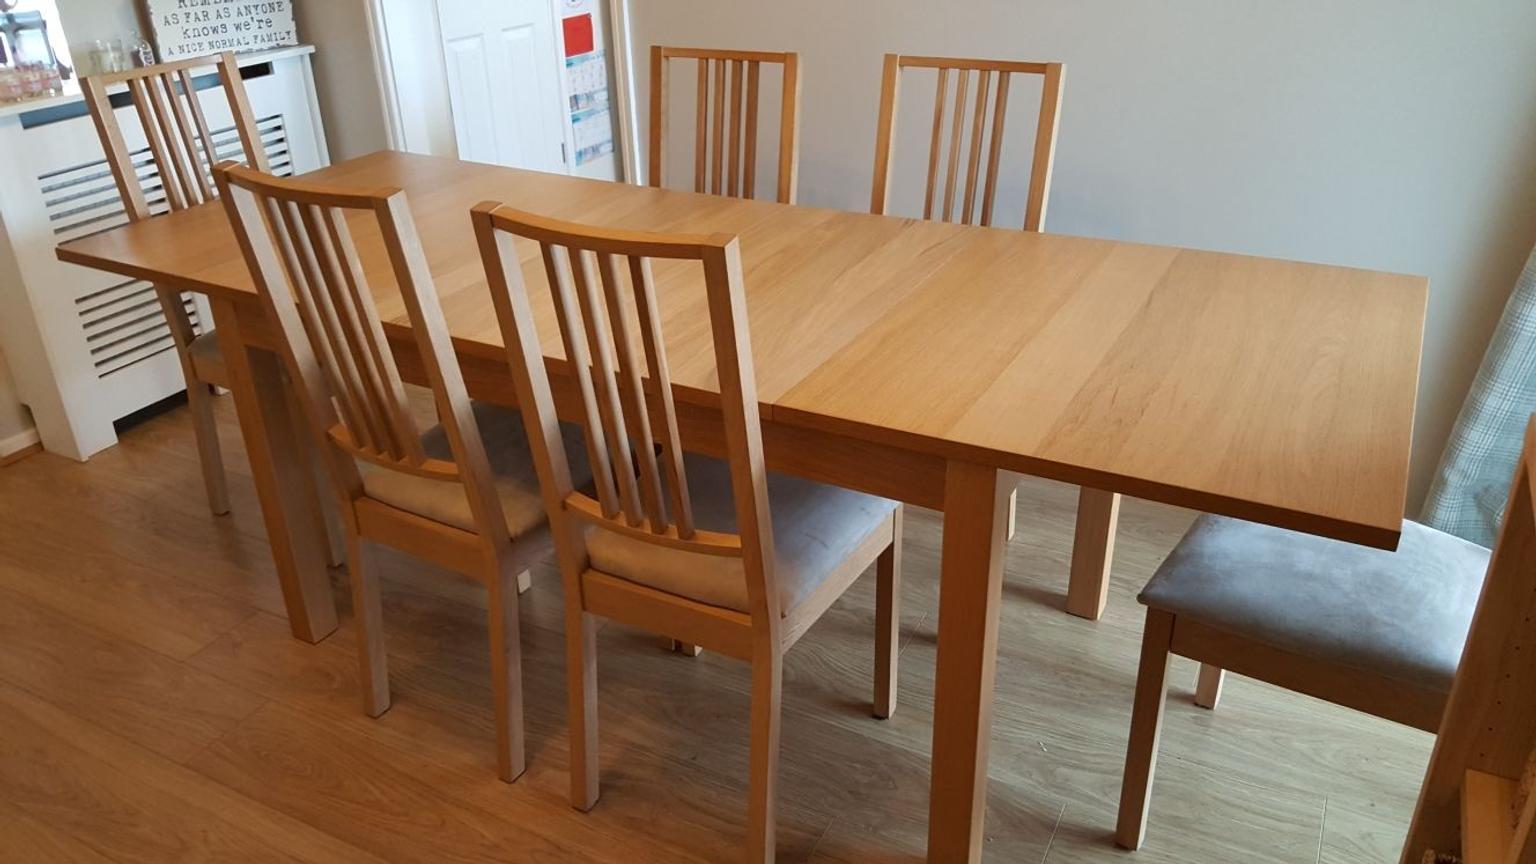 Ikea Extendable Dining Table And 6 Chairs In En11 Broxbourne For 150 00 For Sale Shpock